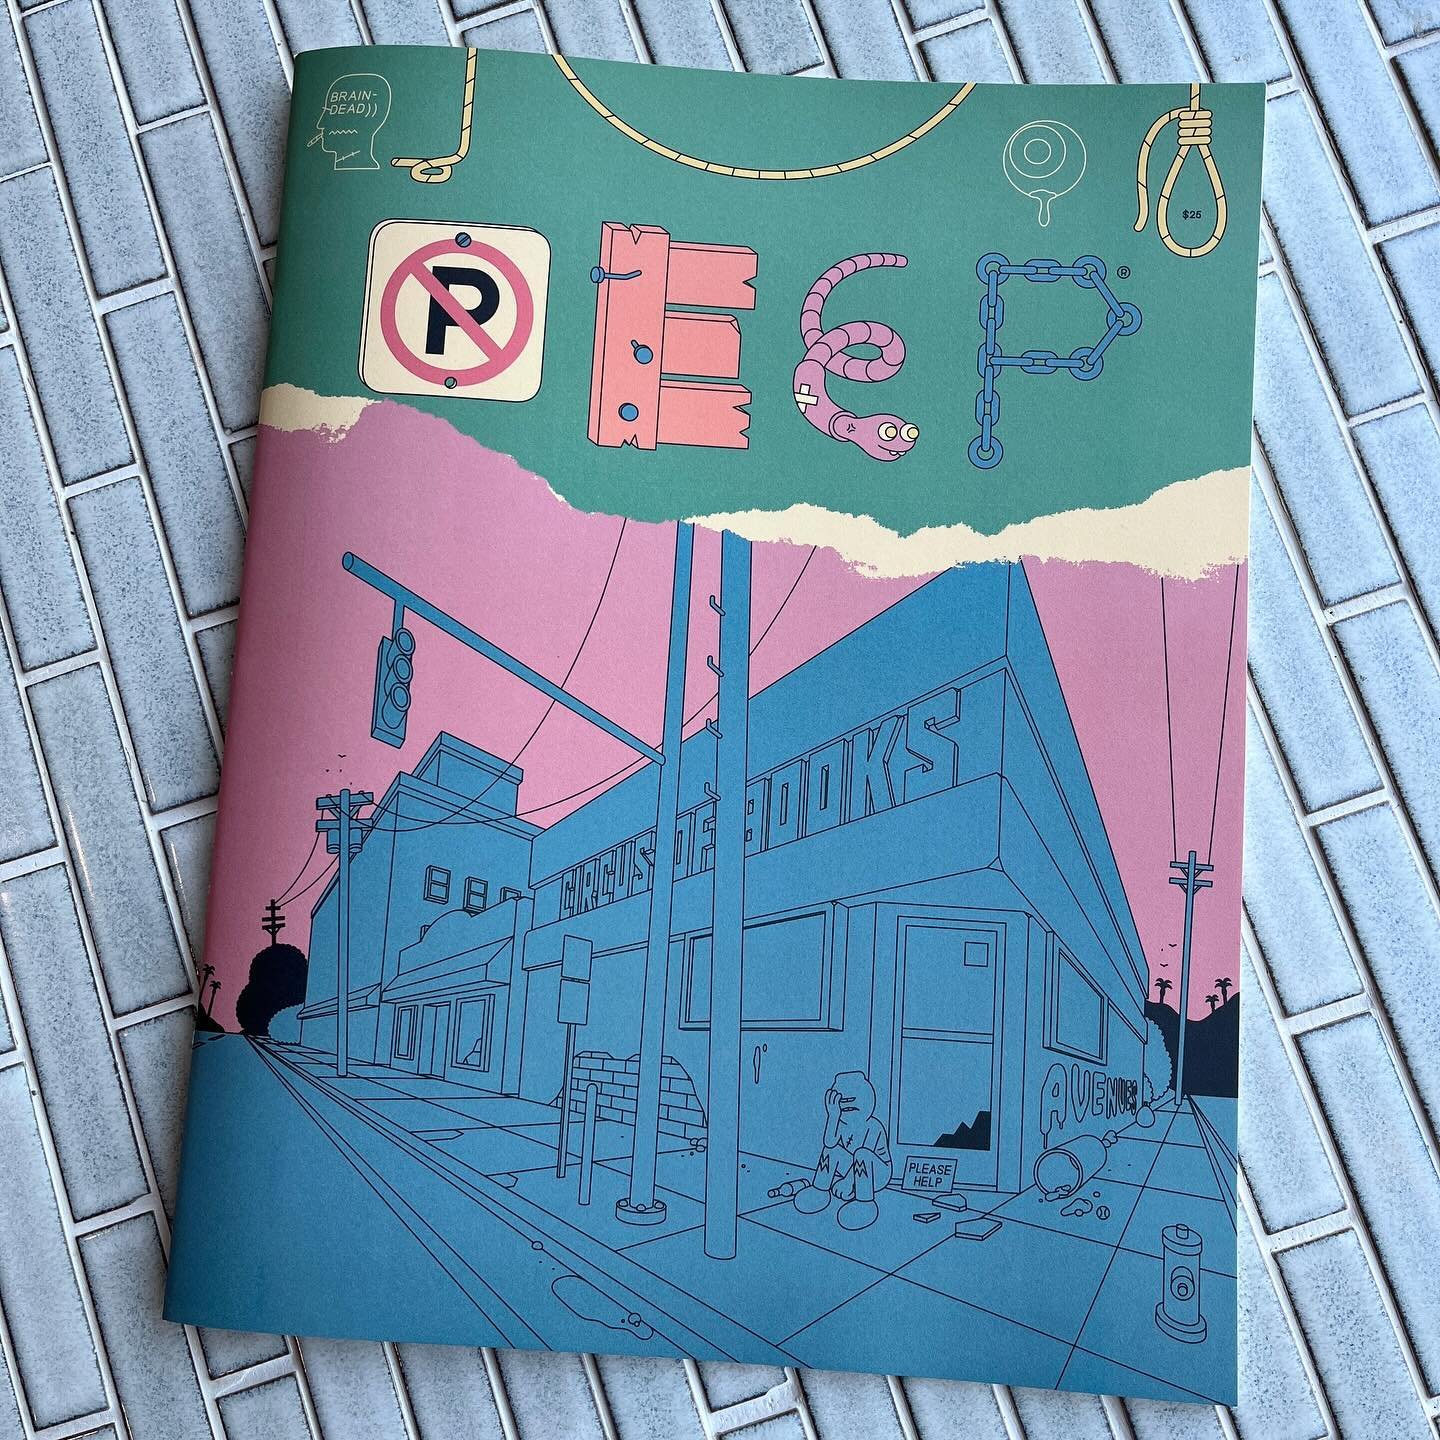 Available now!

PEEP is a brand new Brain Dead comics anthology curated by Sammy Harkham (Blood Of The Virgin) and Steven Weissman (Looking For America&rsquo;s Dog).

Peep&nbsp;features brilliant established creators like Art Spiegelman (Maus) and Ke